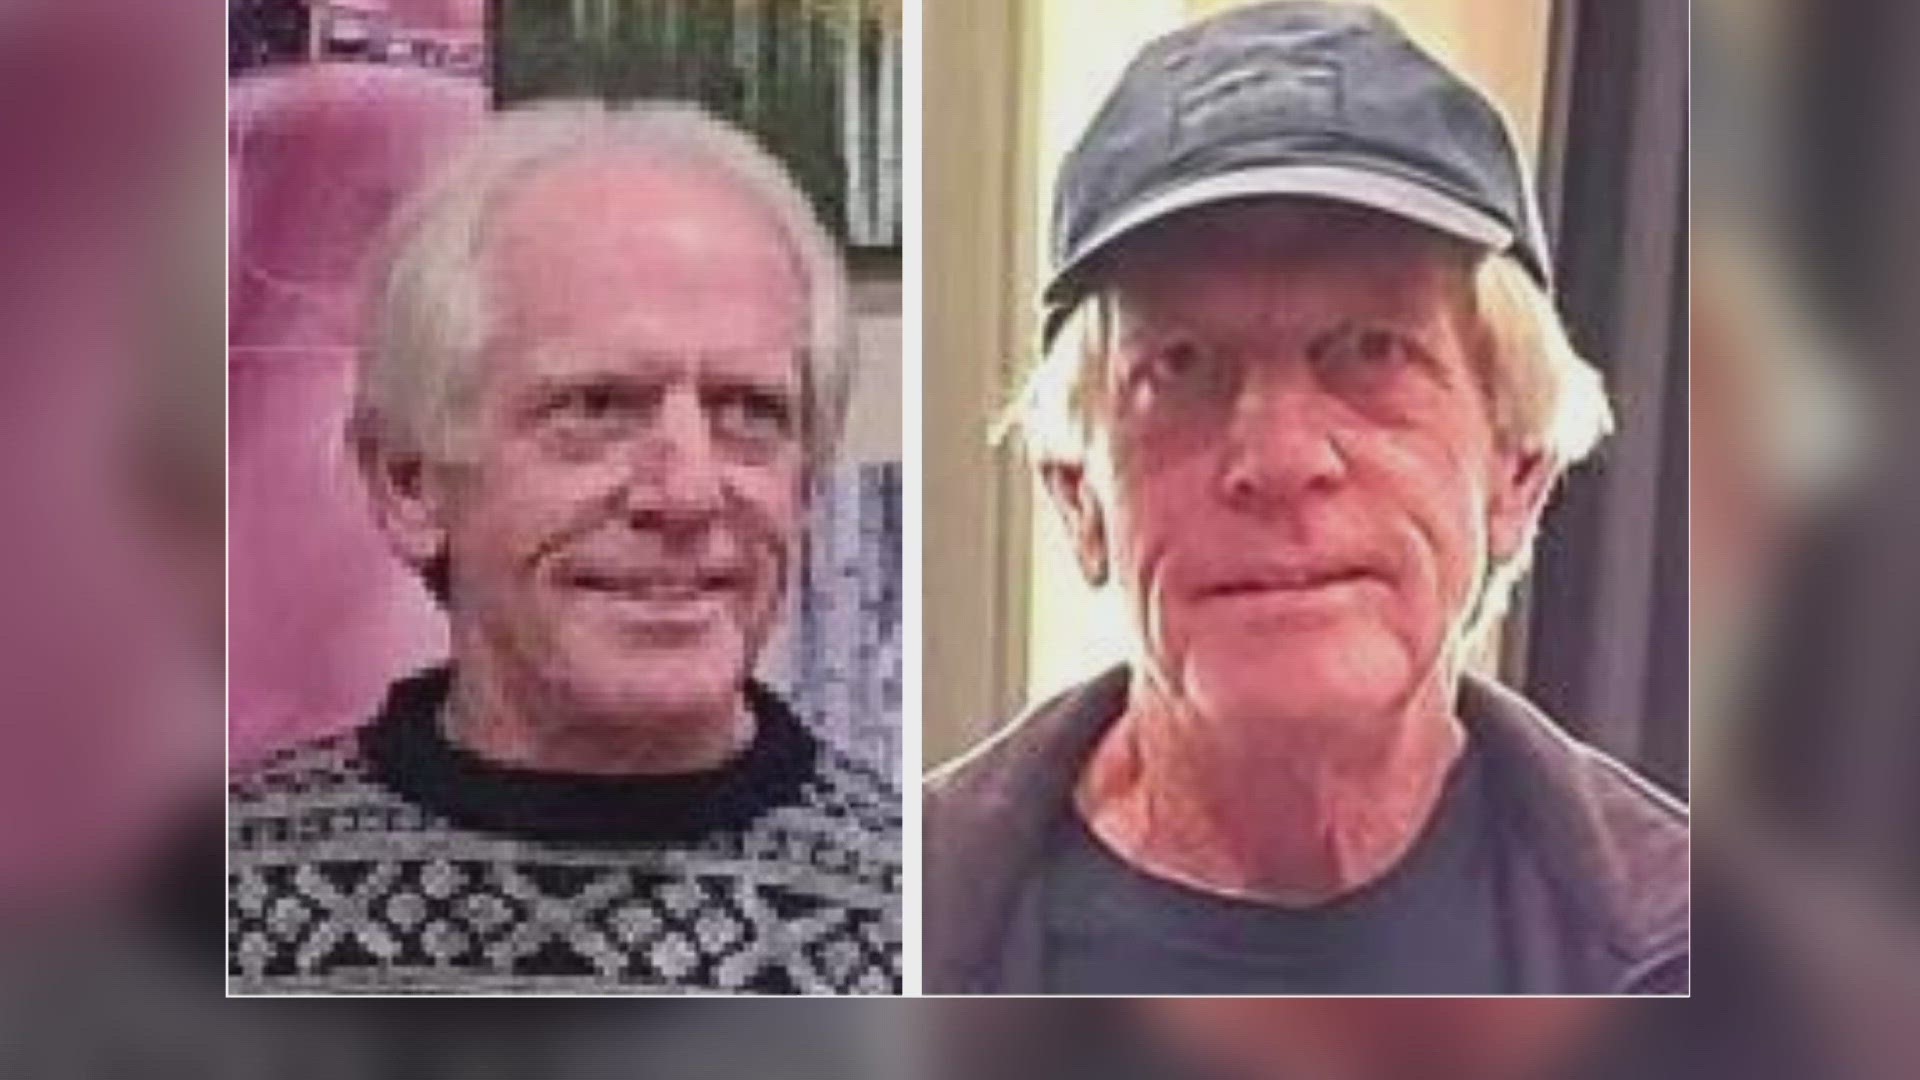 Police said Michael Lohmeier, 73, of Centennial was found dead in his car in the 8500-block of South Yosemite Street Saturday.